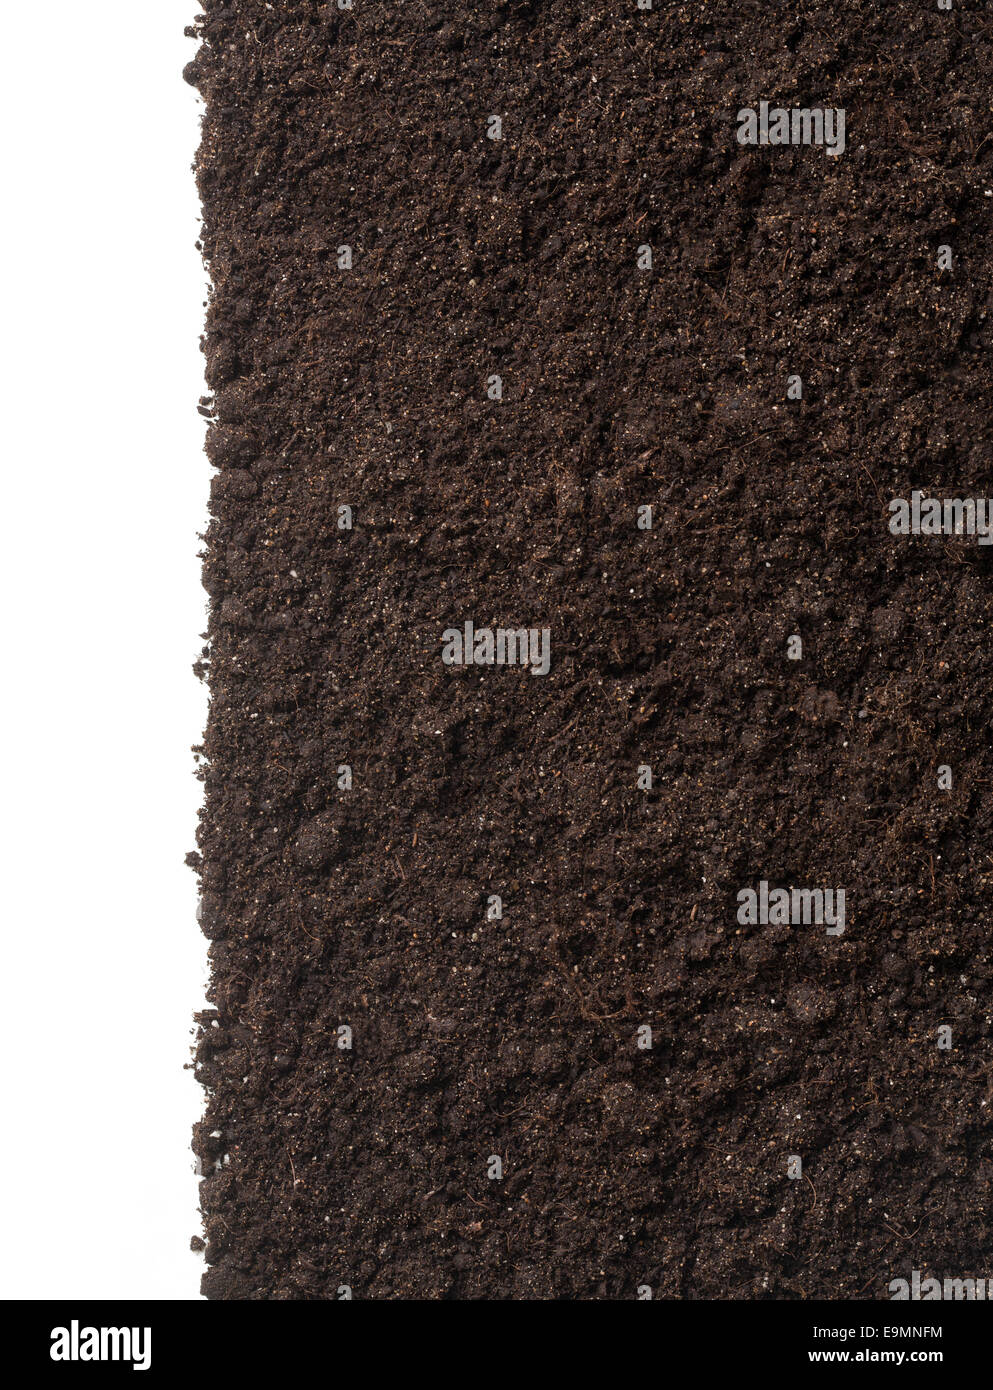 Soil or dirt texture isolated on white background Stock Photo